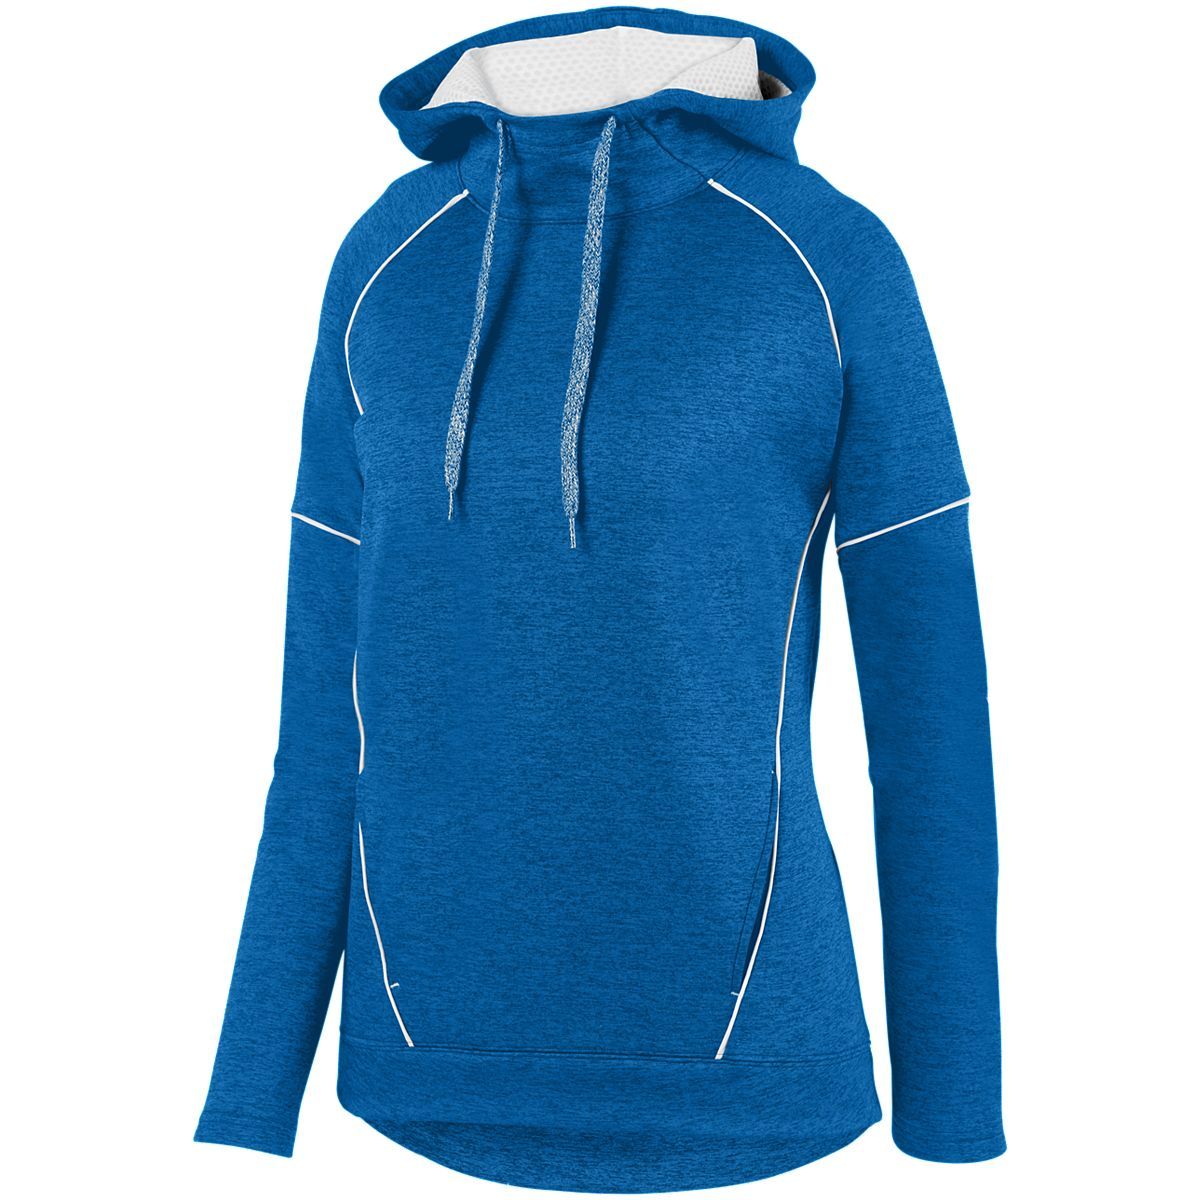 Augusta Sportswear Ladies Zoe Tonal Heather Hoodie in Royal/White  -Part of the Ladies, Augusta-Products, Shirts, Tonal-Fleece-Collection product lines at KanaleyCreations.com